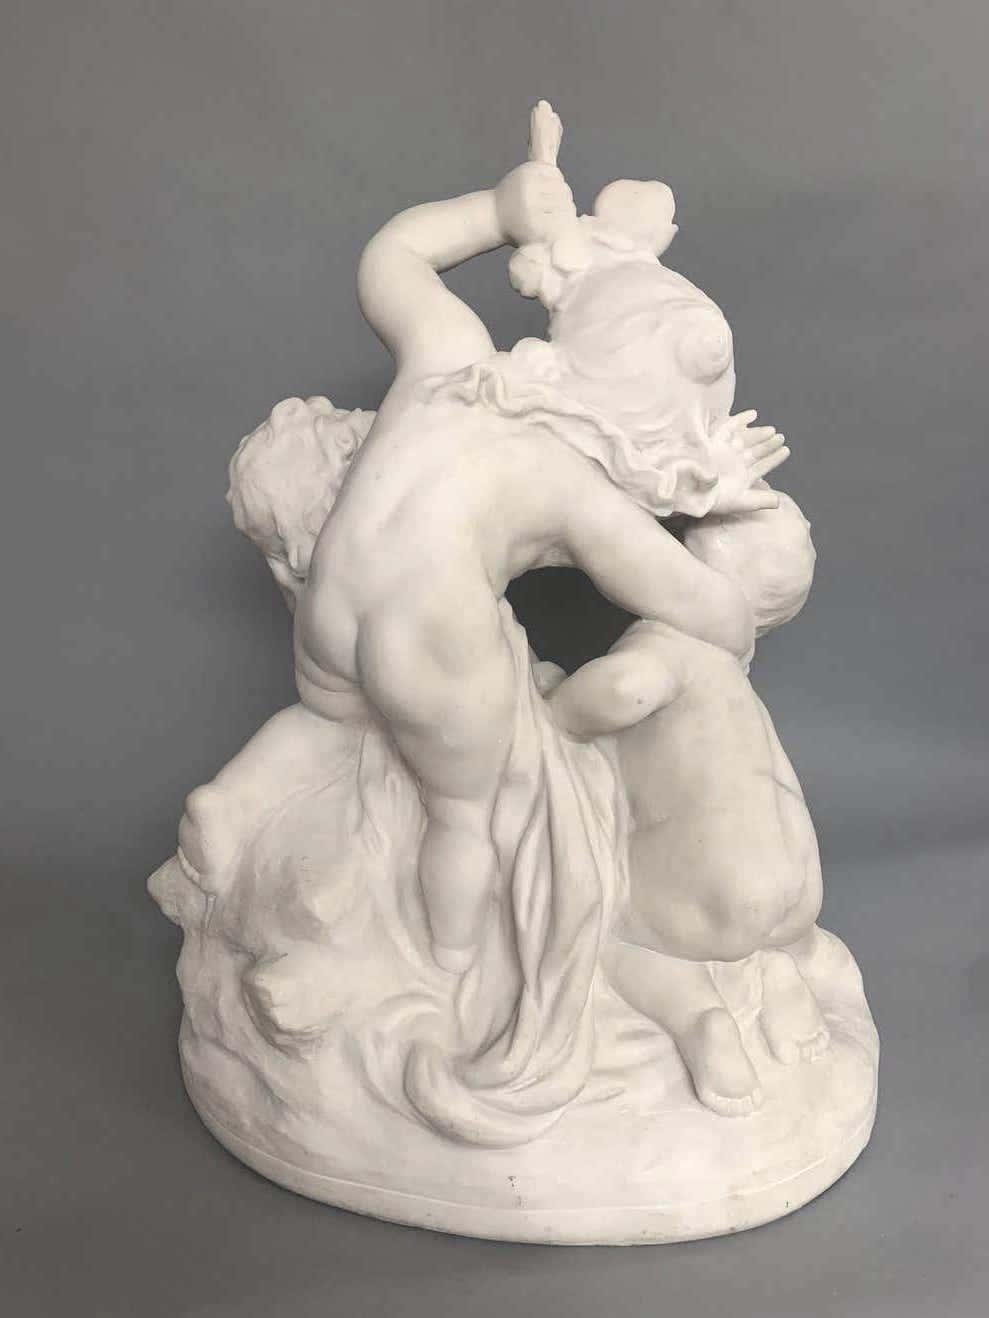 Figural Grouping of Playful Cupids 
by Raphael Charles Peyre (1872-1949)
carved white Composition
Signed R.Ch.Peyre
Height 22 in. (56 cm)

NMA Inv 3969